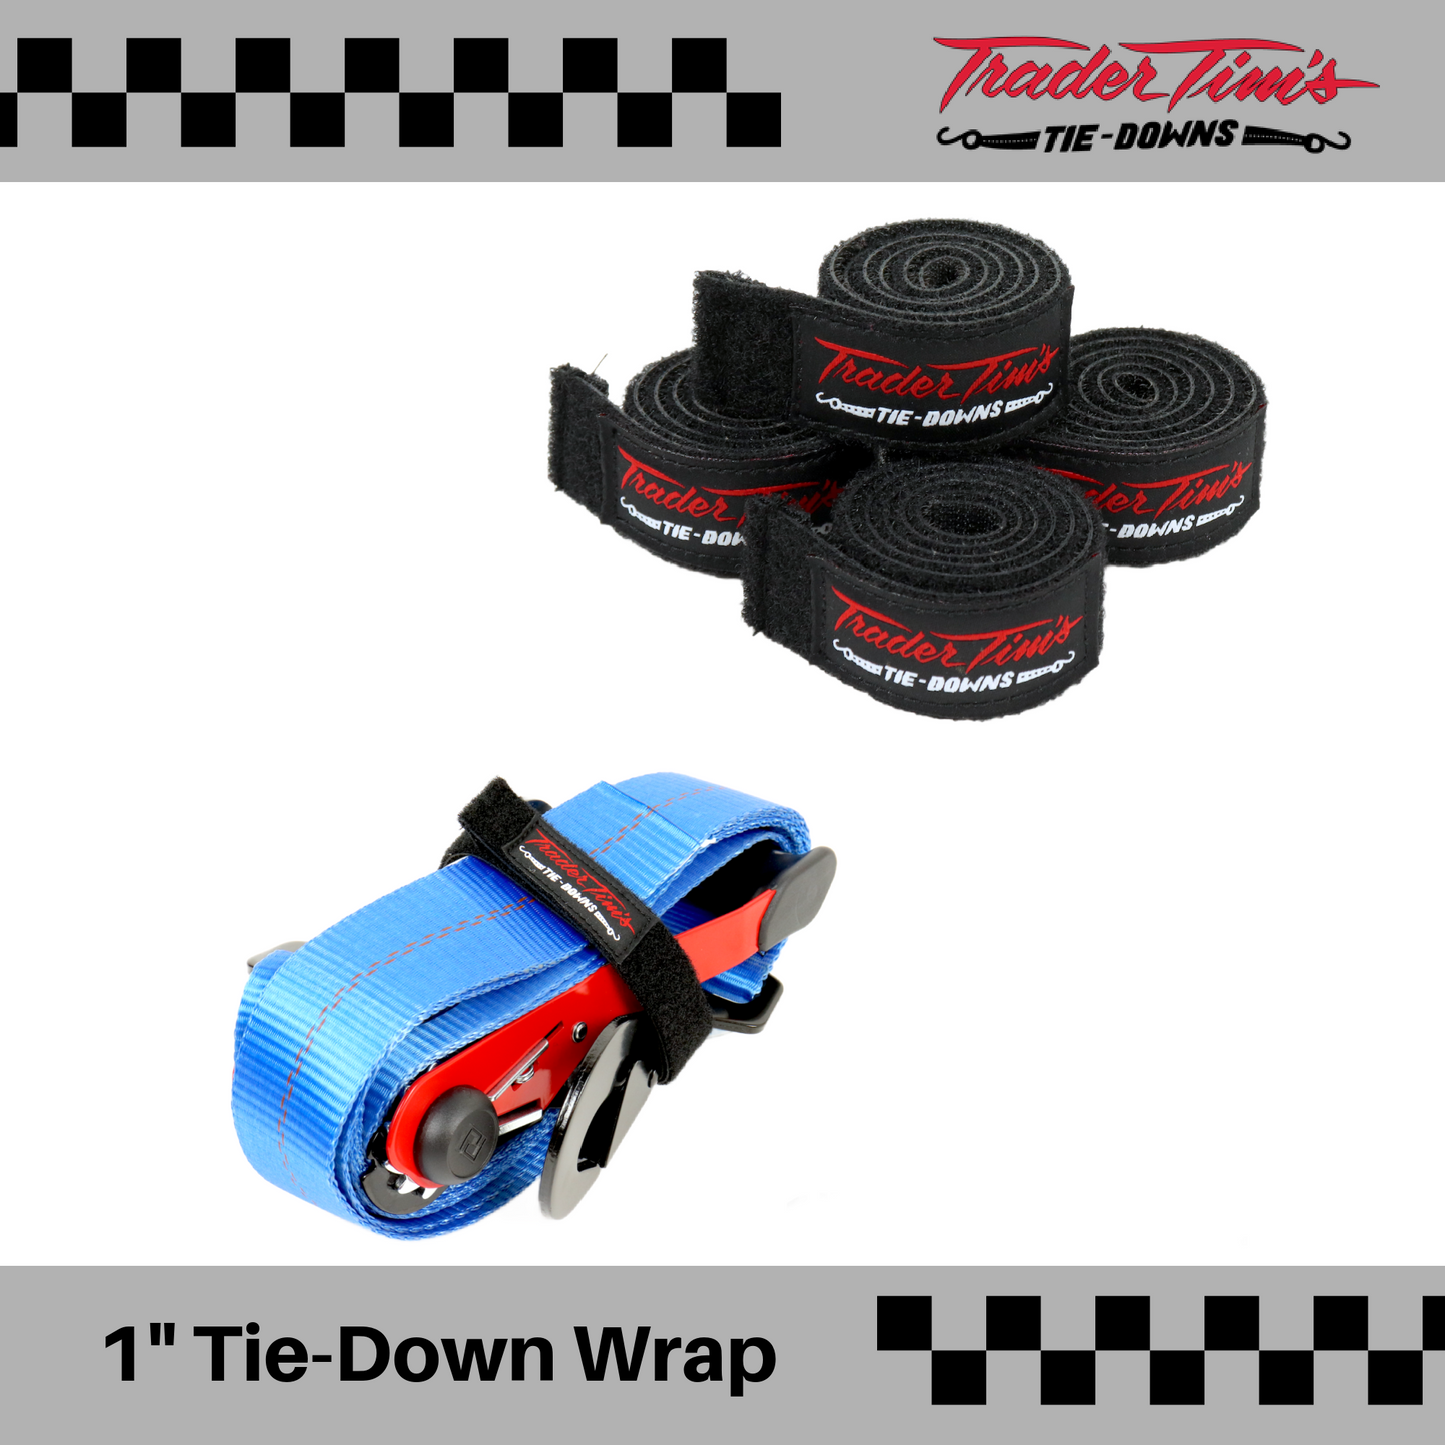 17 Piece 2" Ratchet Tie-Down with Axle Straps and Covers Kit - 4 Colors Available